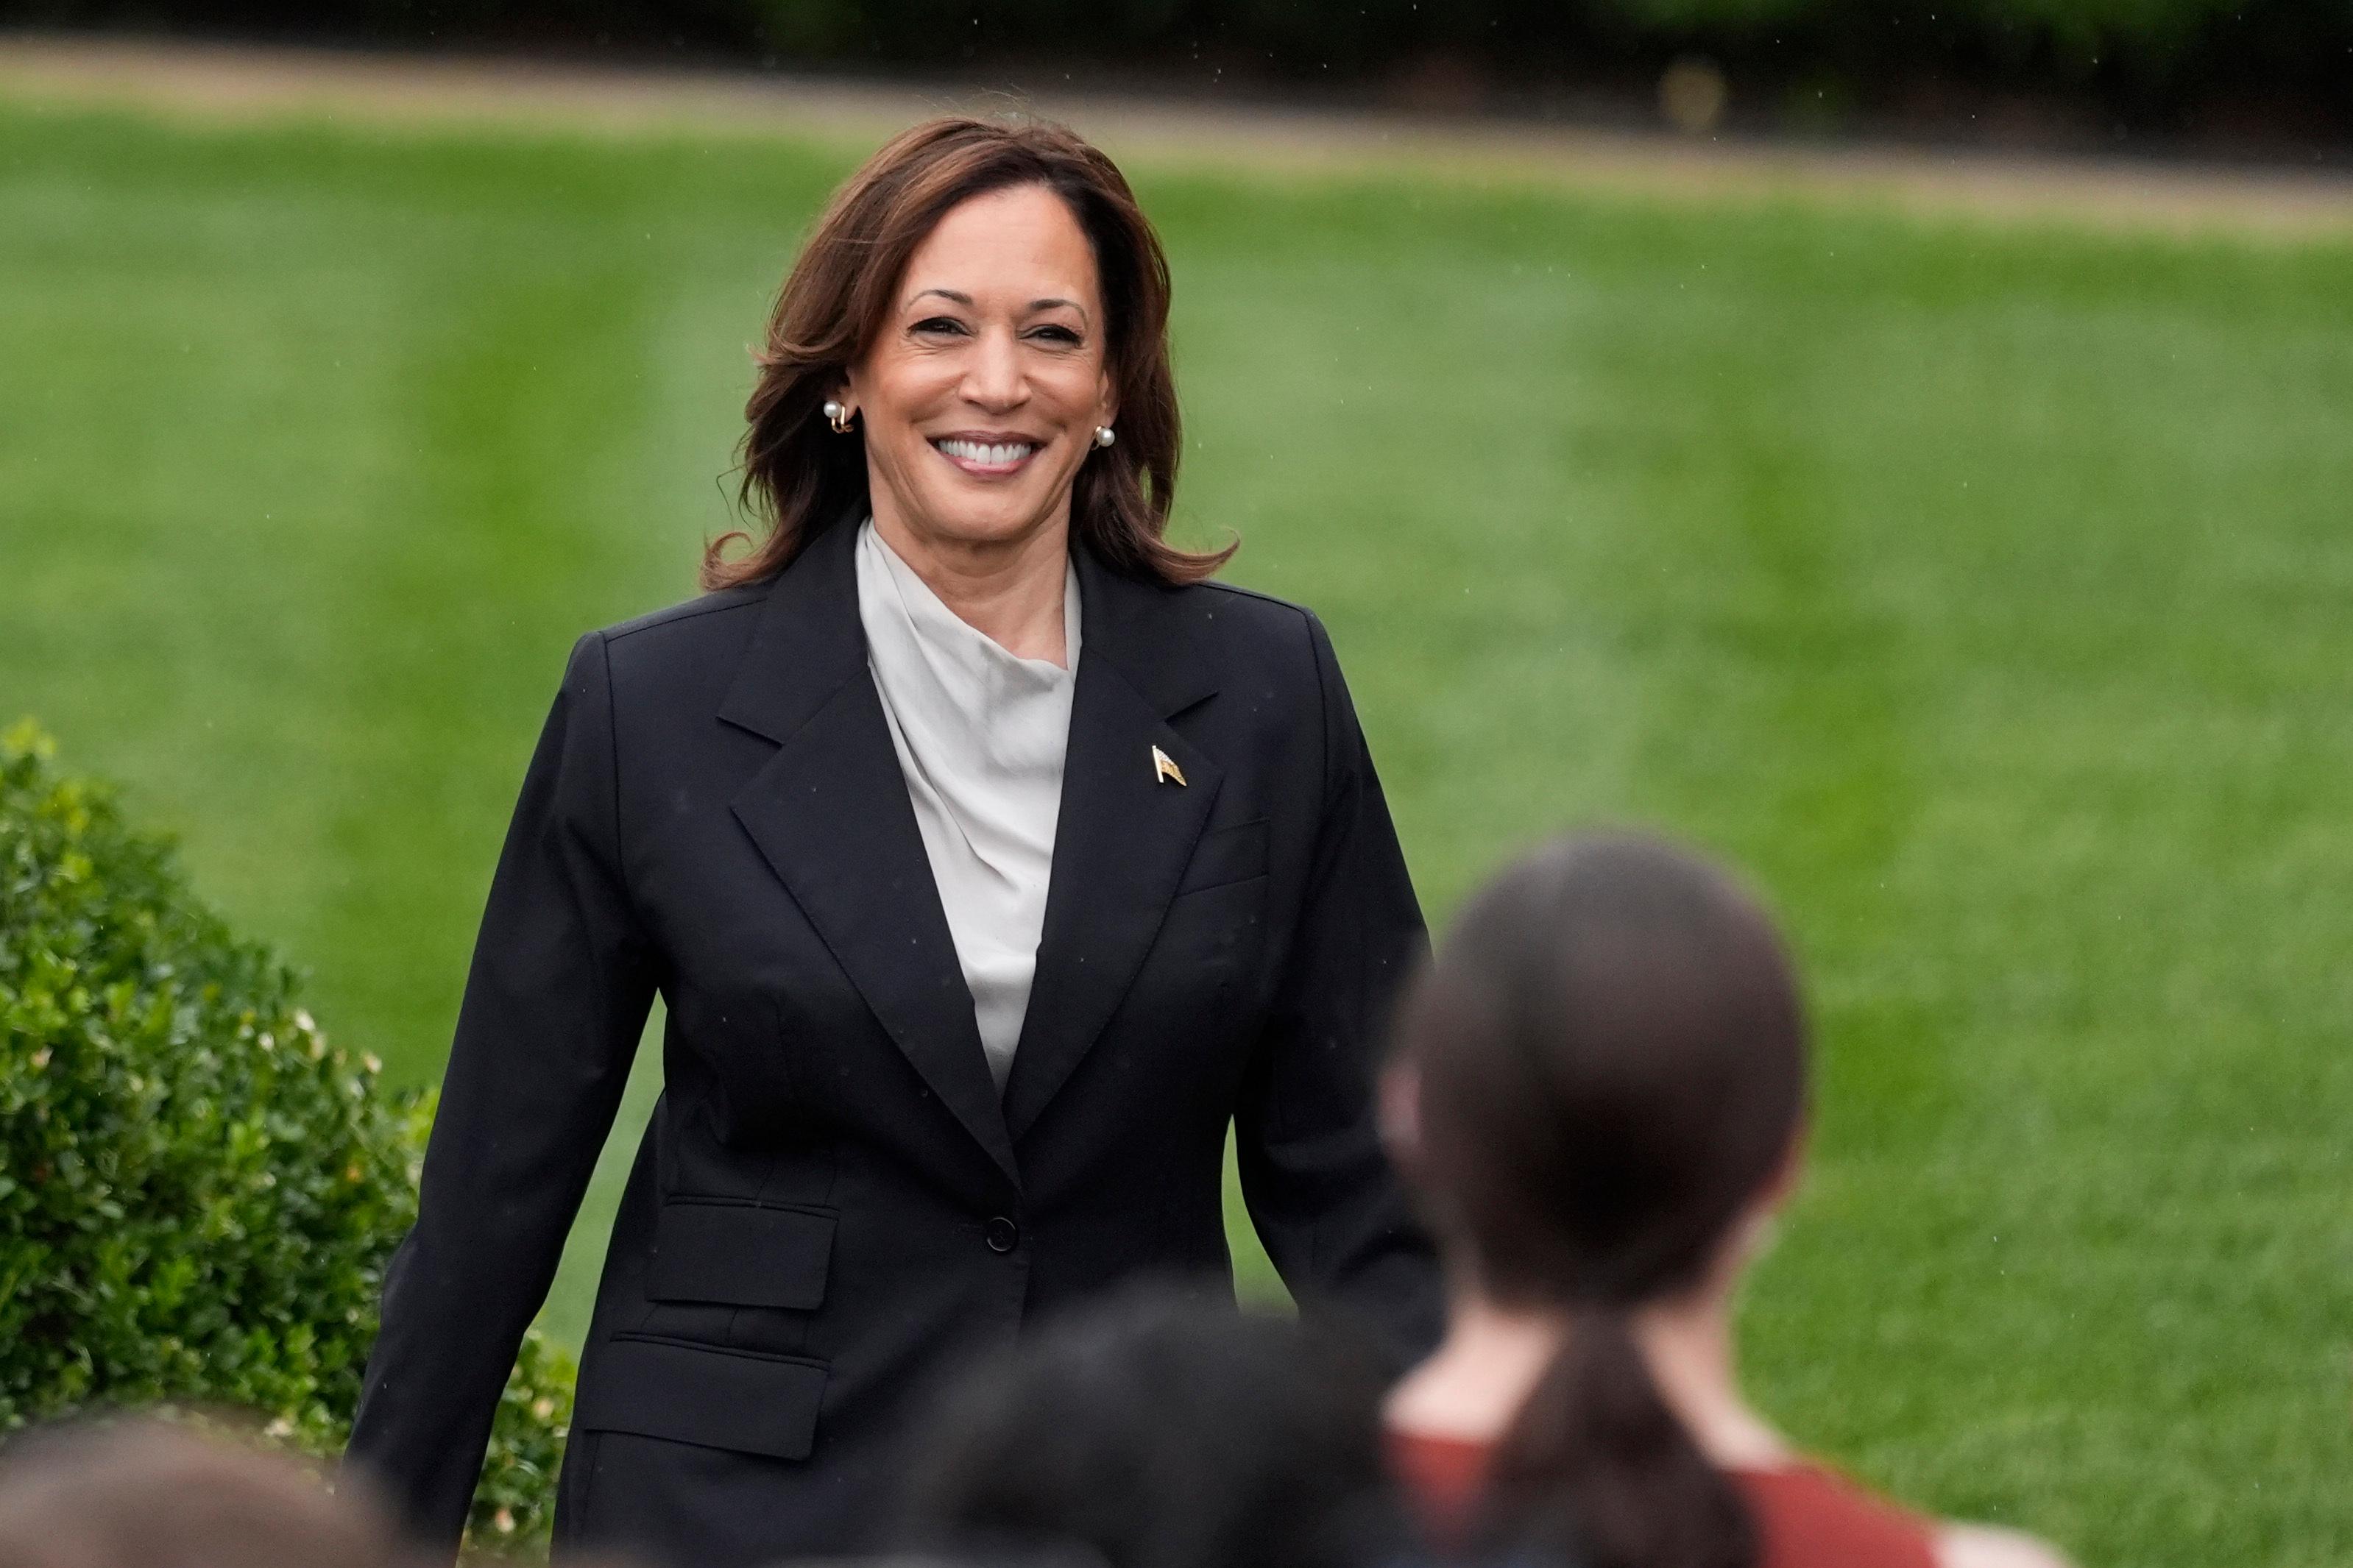 Kamala Harris walking from the South Lawn of the White House, green grass is directly behind her with a lush green bush to her right - our left. Wearing a black blazer with a golden American flag pin and a grey top underneath. The back of someone's head is in front of her blurry.